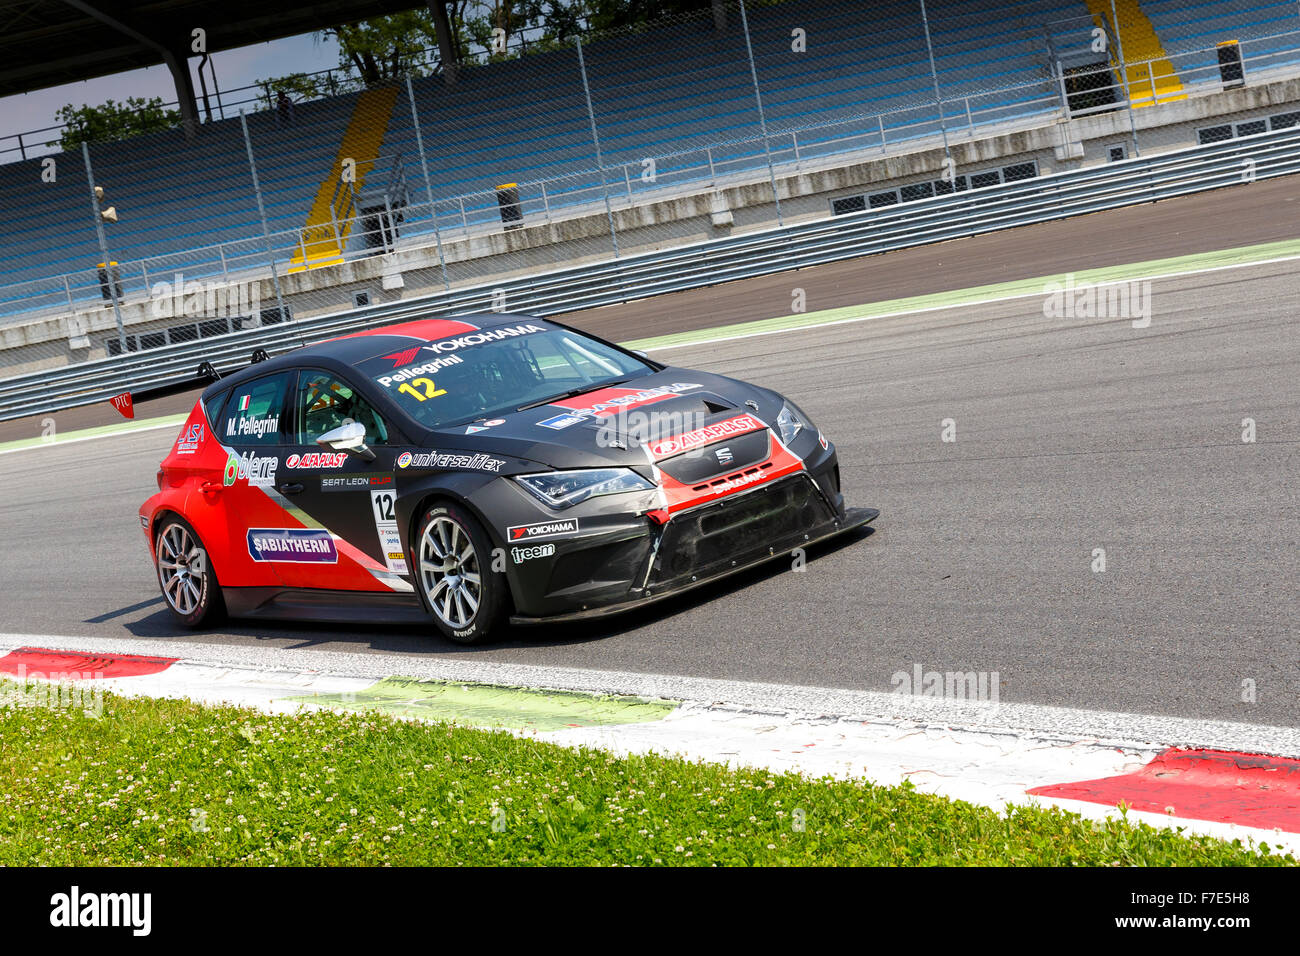 Monza, Italy - May 30, 2015: SEAT Leon Cup Racing of Dinamic driven  by PELLEGRINI Marco during the Seat Leon Cup - Race Stock Photo